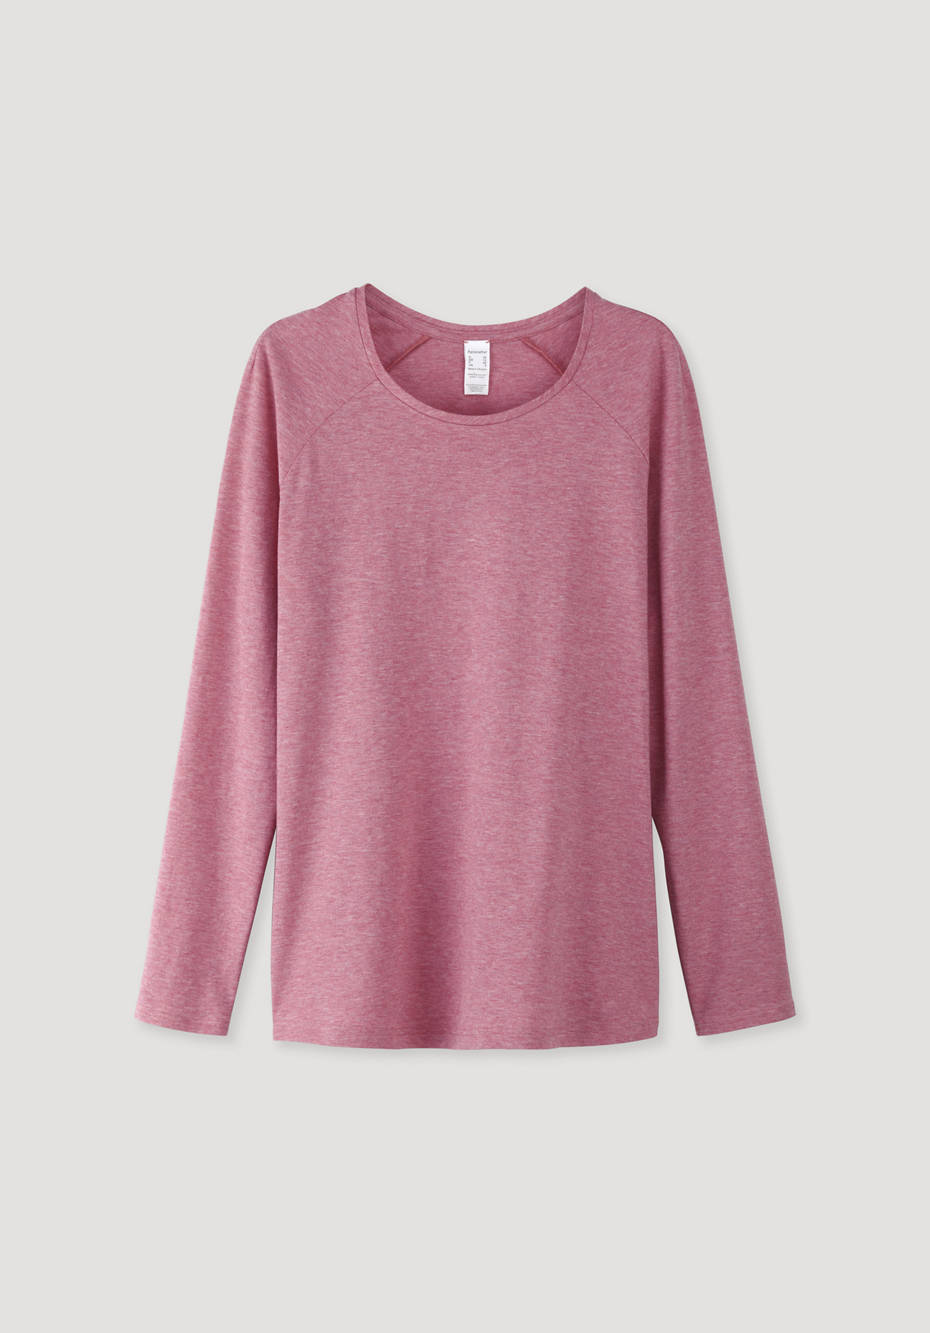 Long-sleeved shirt made from pure organic cotton